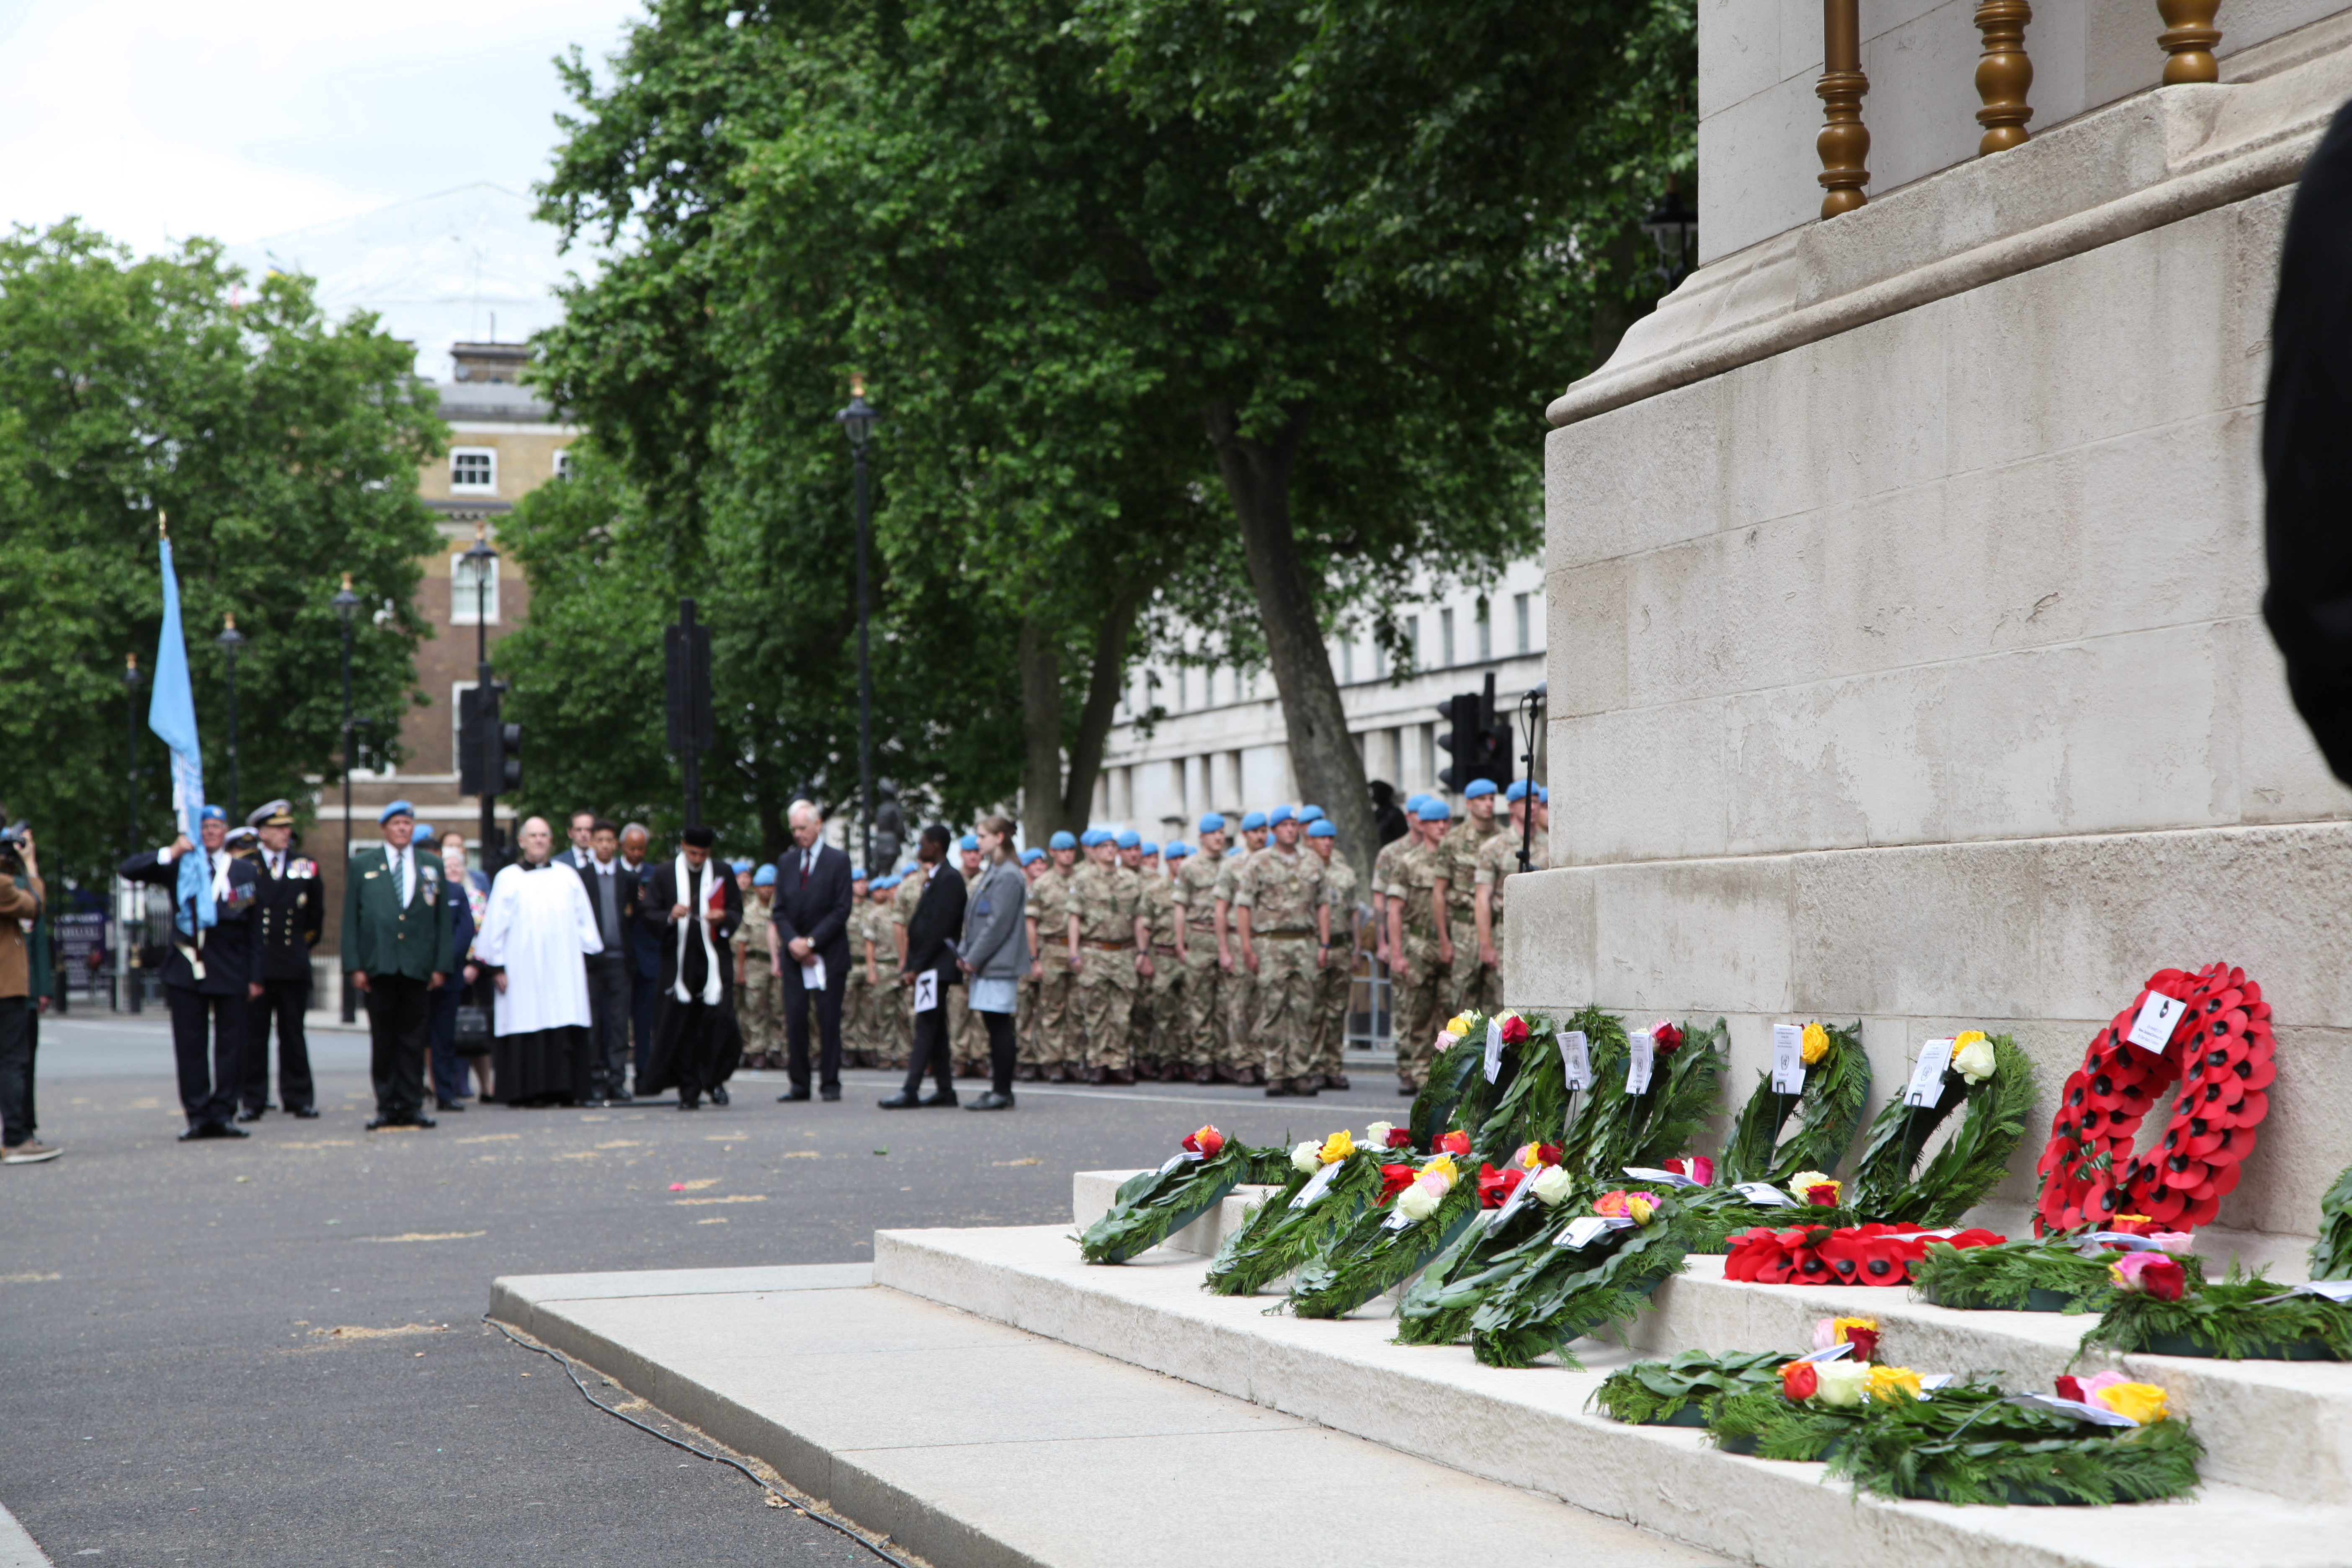 Wreath-laying ceremony at the Cenotaph to mark UN Peacekeepers Day.